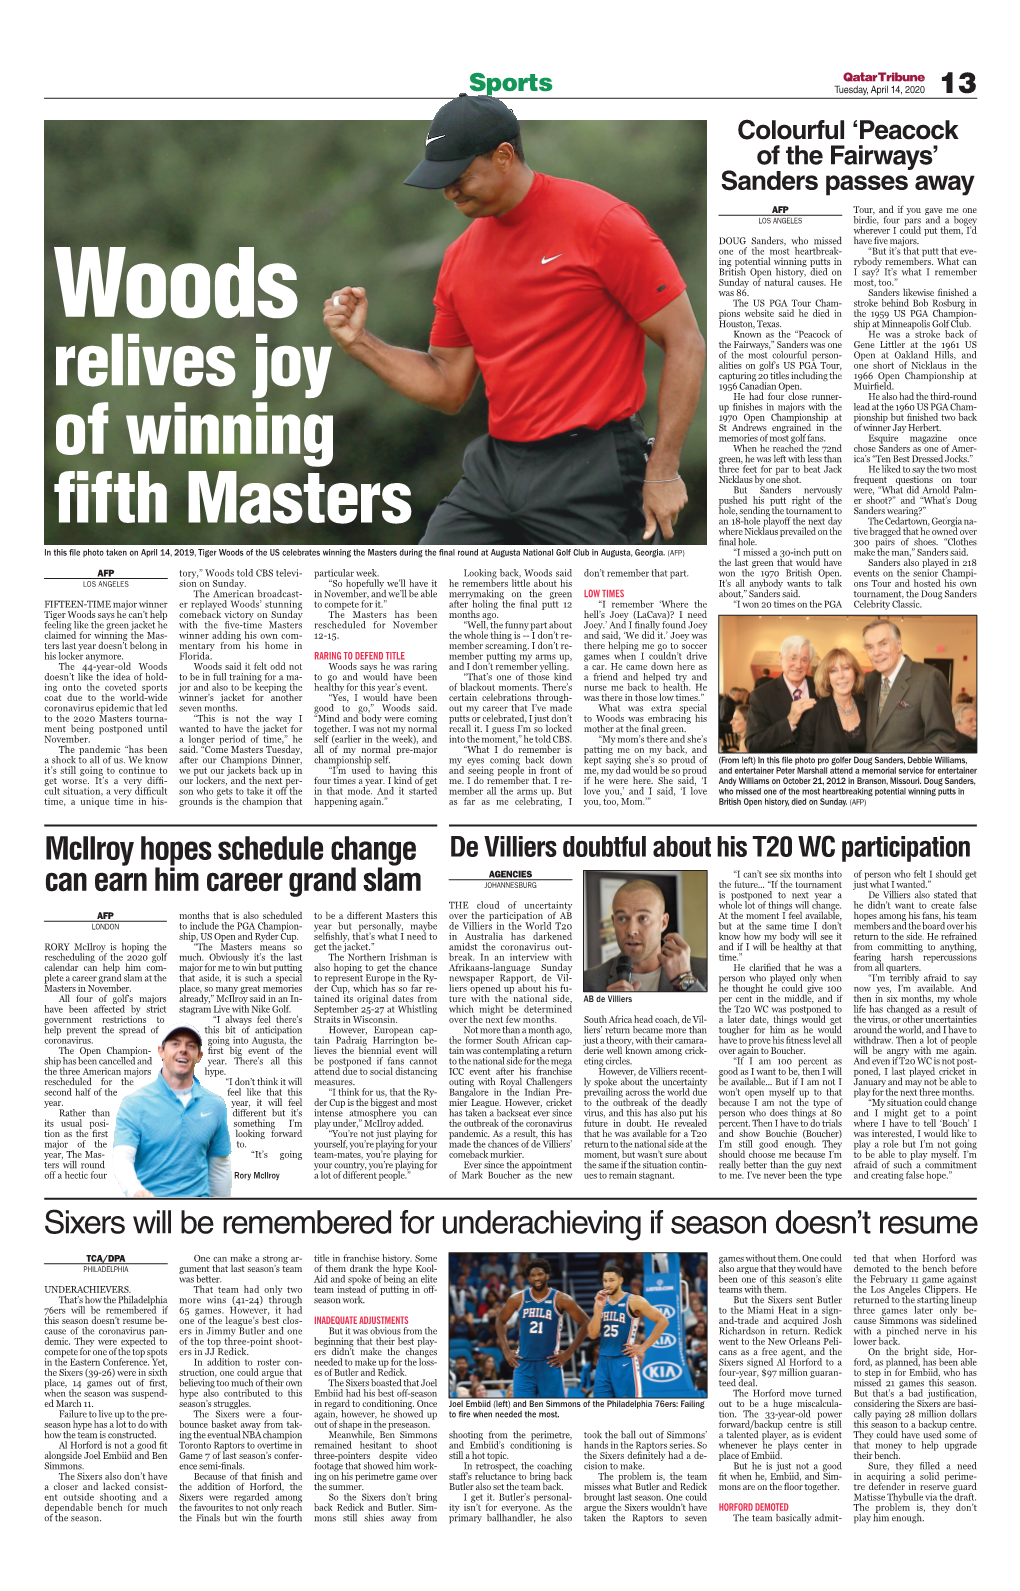 Relives Joy of Winning Fifth Masters